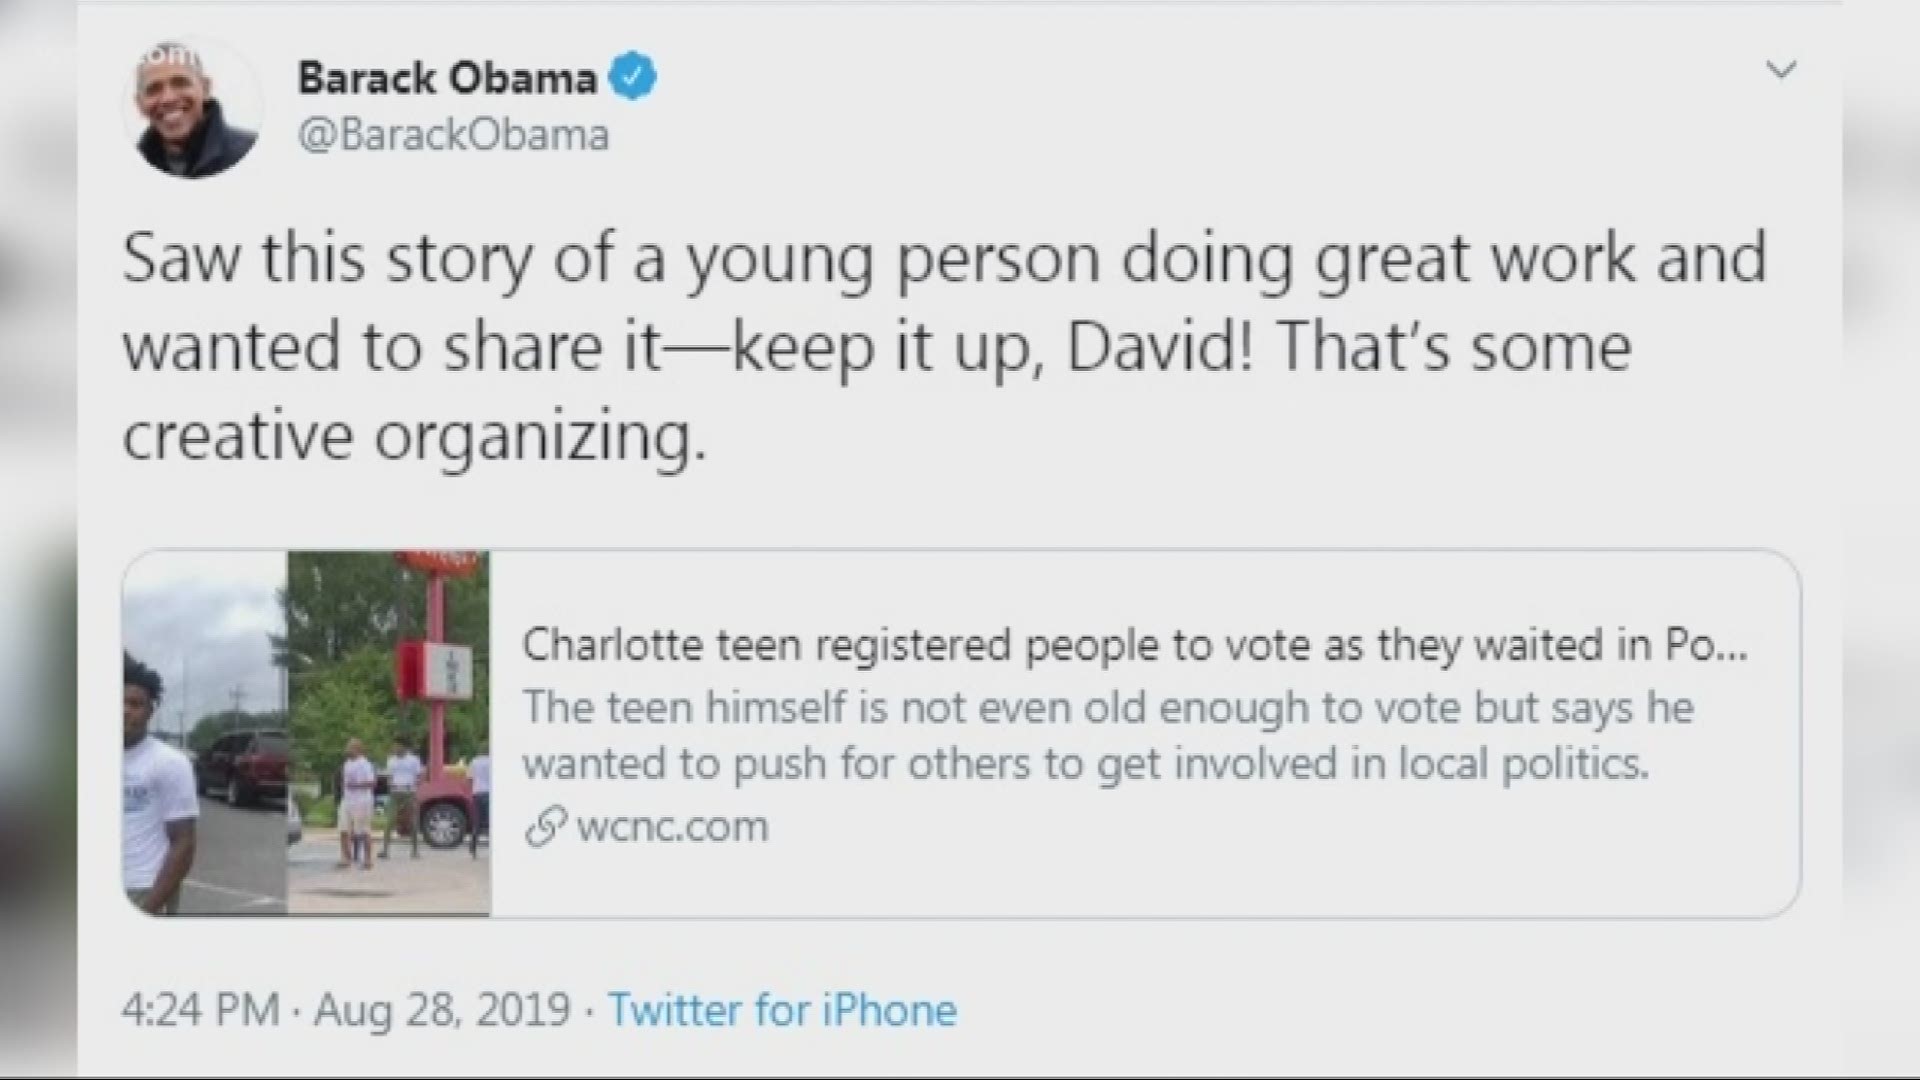 Obama tweeted, "Saw this story of a young person doing great work and wanted to share it—keep it up, David! That's some creative organizing." We caught up with 17-year-old David Ledbetter and asked him how it feels to get national attention.